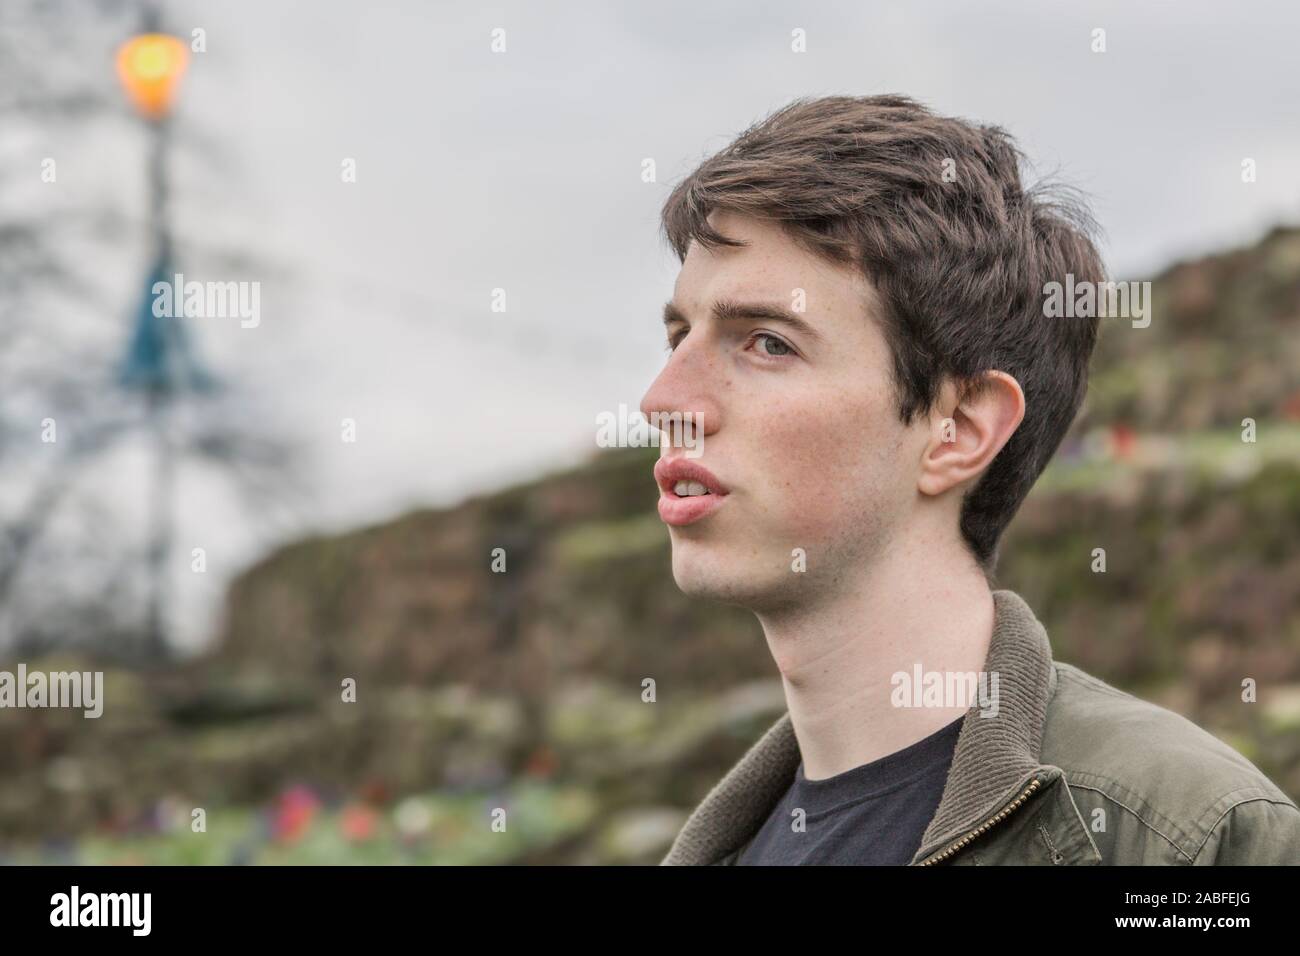 A young man in his late teens or early twenties stands outdoors with a pensive expression as he looks into the distance. Stock Photo